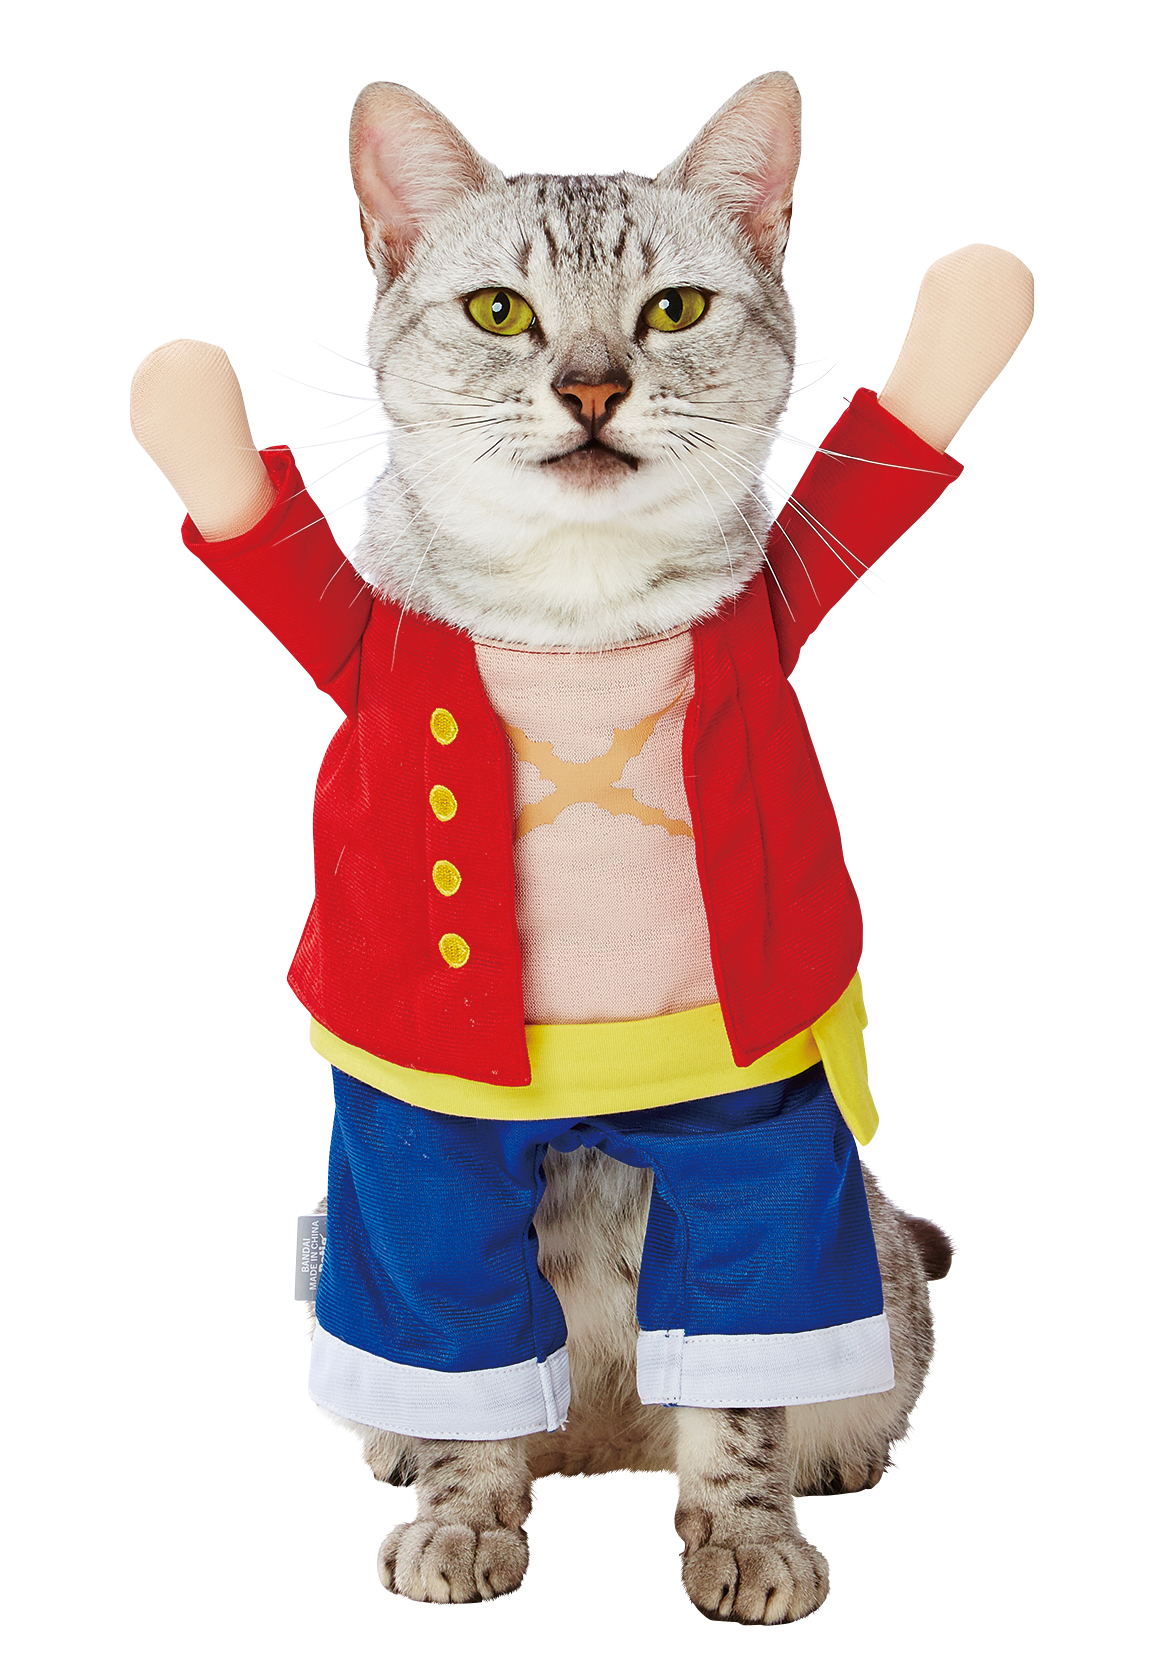 Coomour Cat Costume Funny Pet Clothes Cute Anime Small Dog Scout Soldiers  Apprarel Outfits Puppy Cosplay Cape Party Clothing S  Amazonin Pet  Supplies